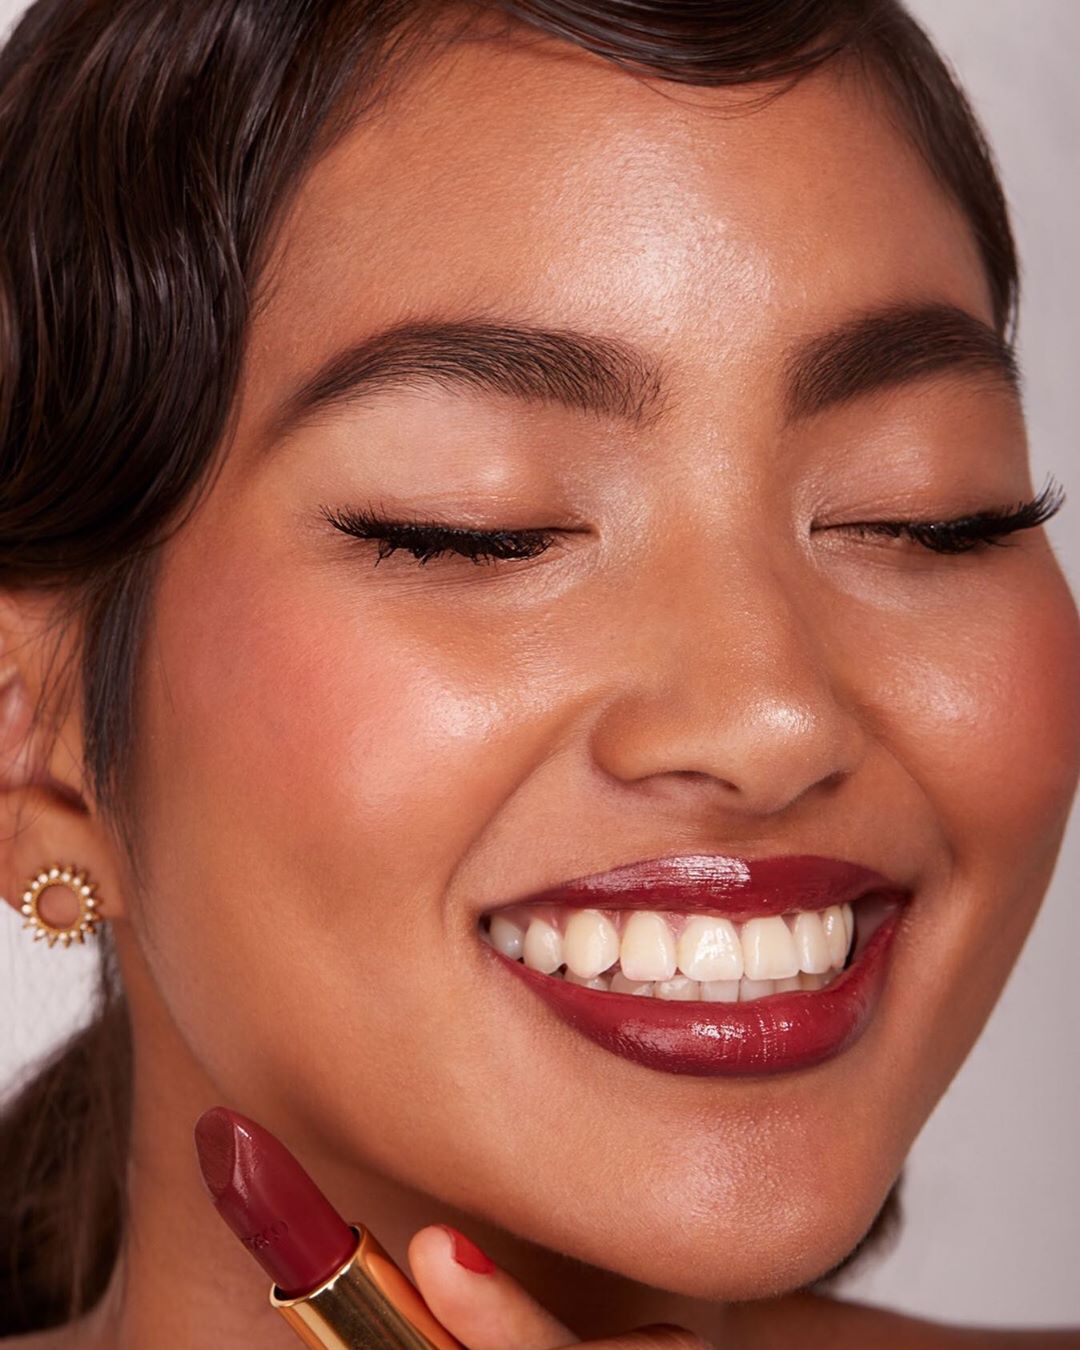 ARTDECO - Let's bring up your cutest smile! Thanks to our signature products of the NEW GOLDEN TWENTIES! 😍 ⠀
⠀⠀⠀⠀⠀⠀⠀⠀⠀
Products used: 
Full Waves Curling Mascara limited edtion
Perfect Color Lipstick...